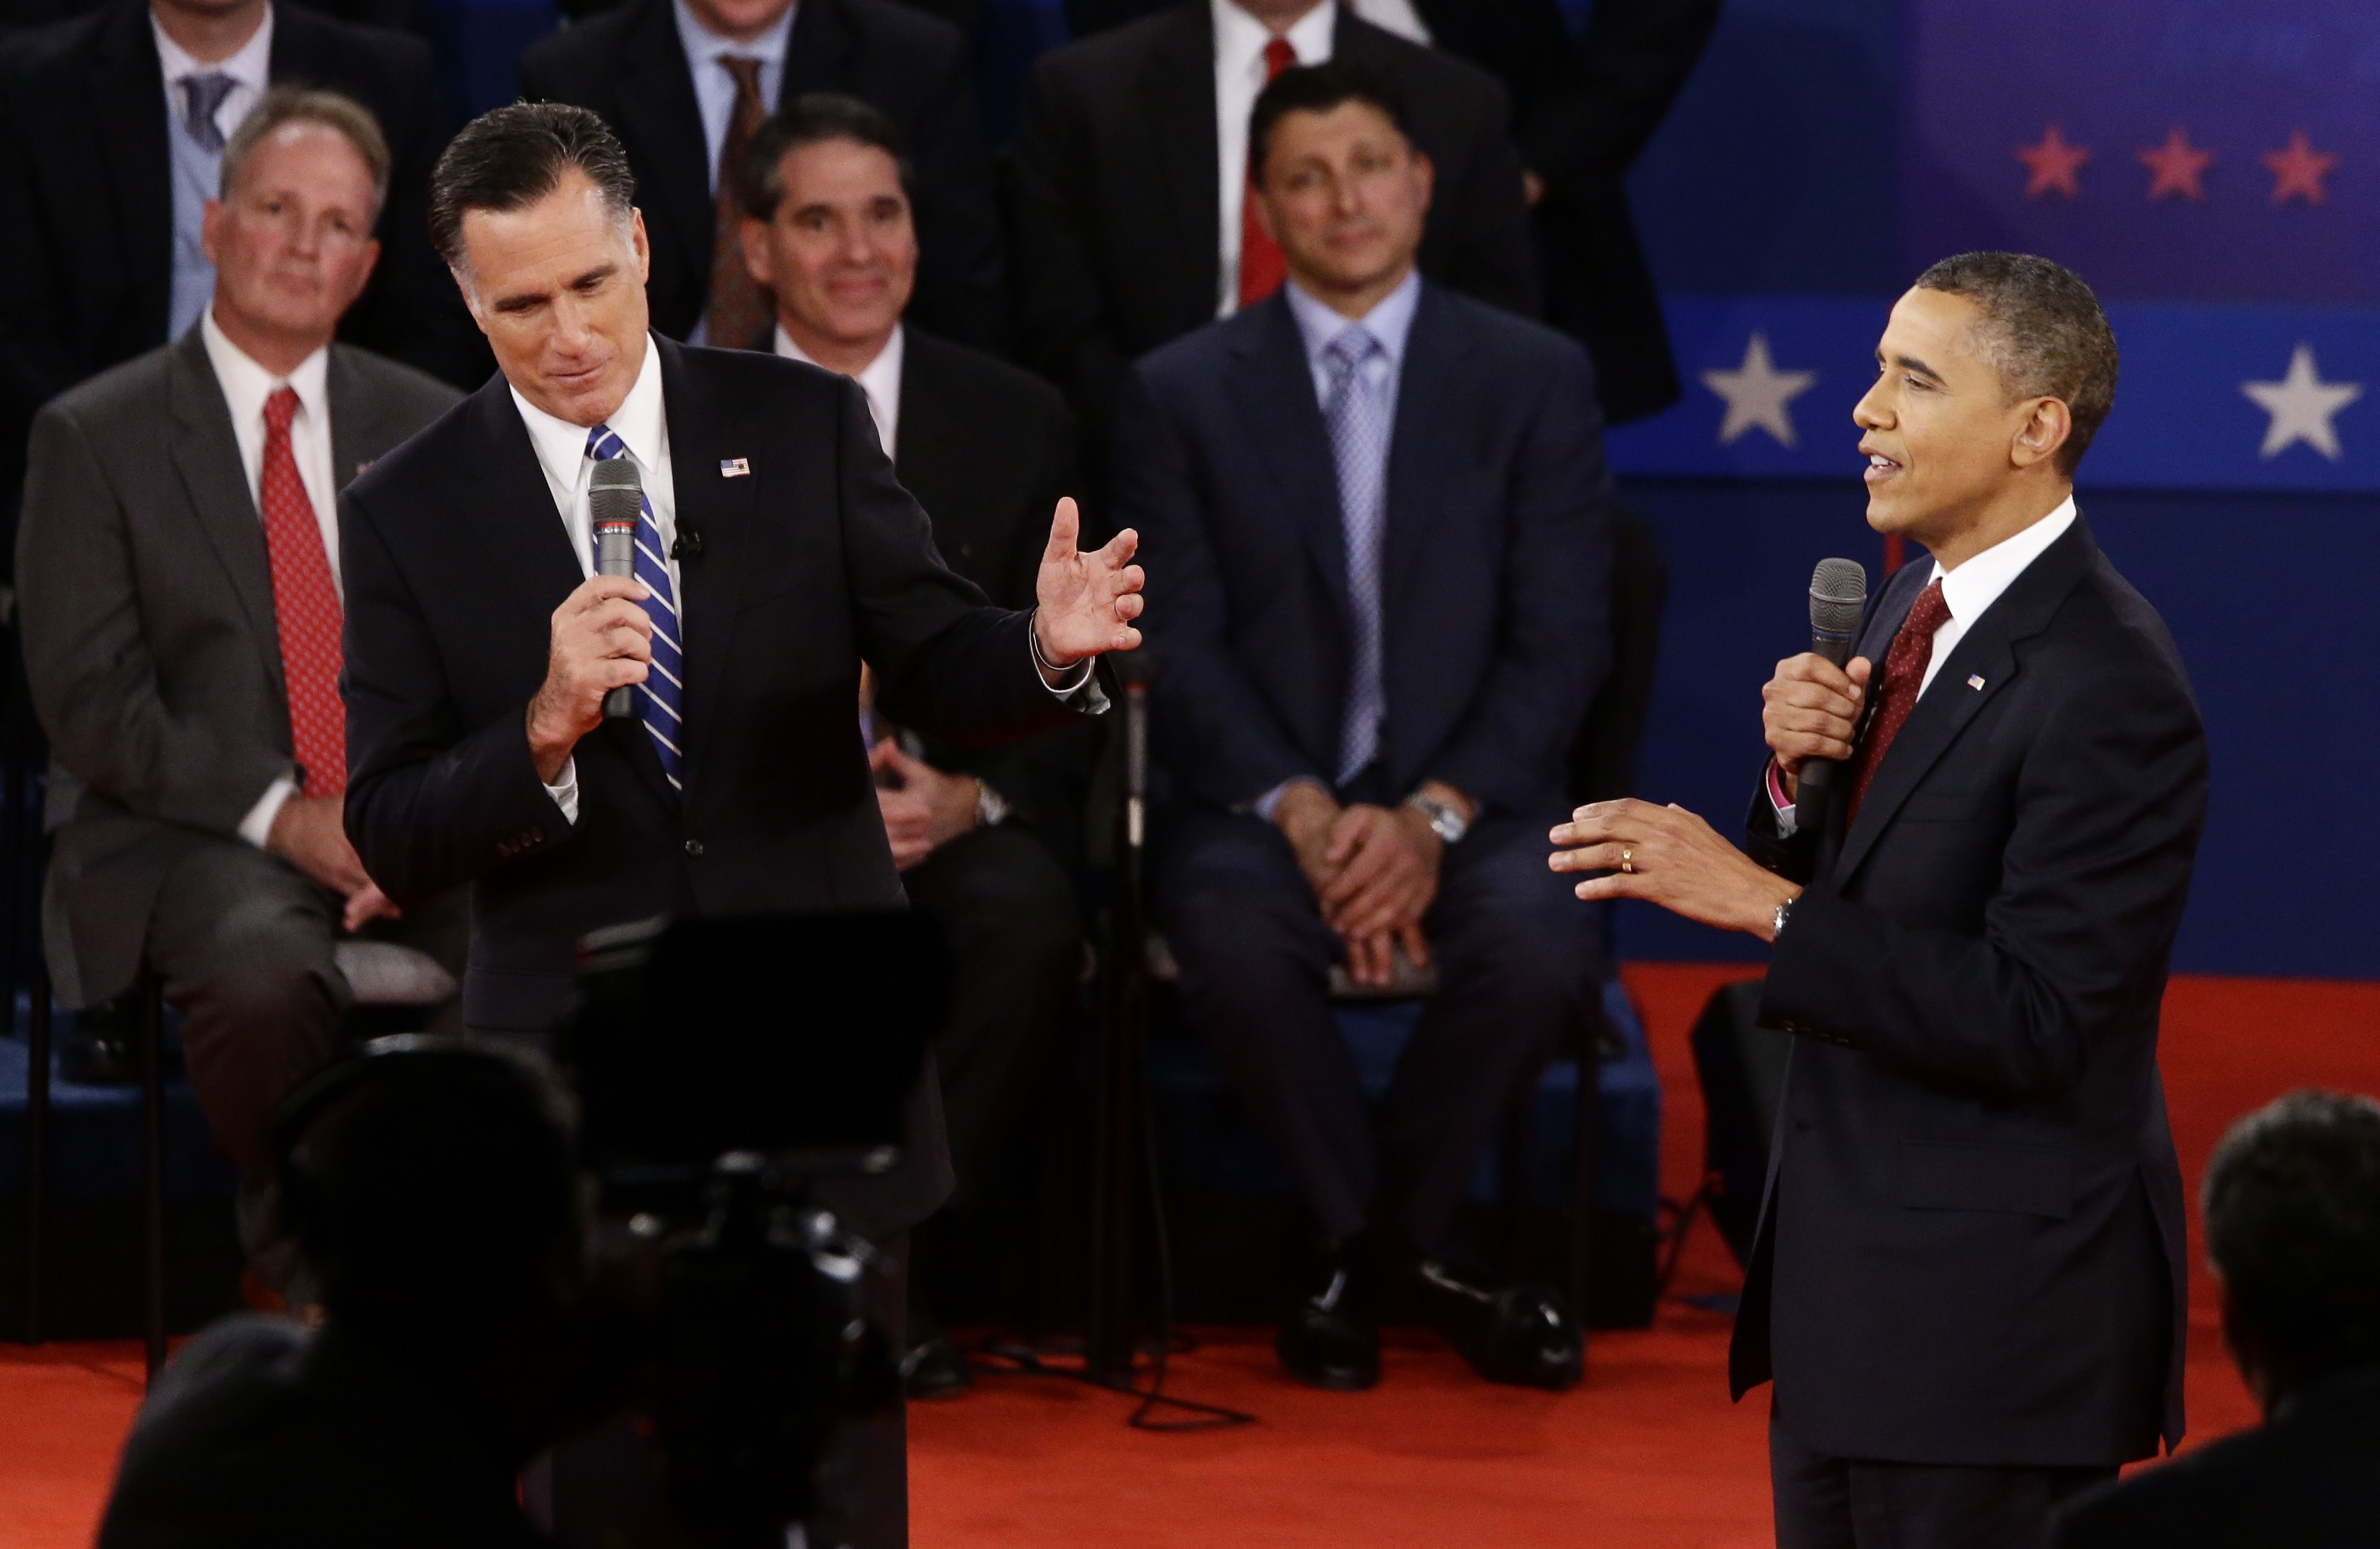 Voters Decide on President by Body Language: Romney Won the Presidency Last Night